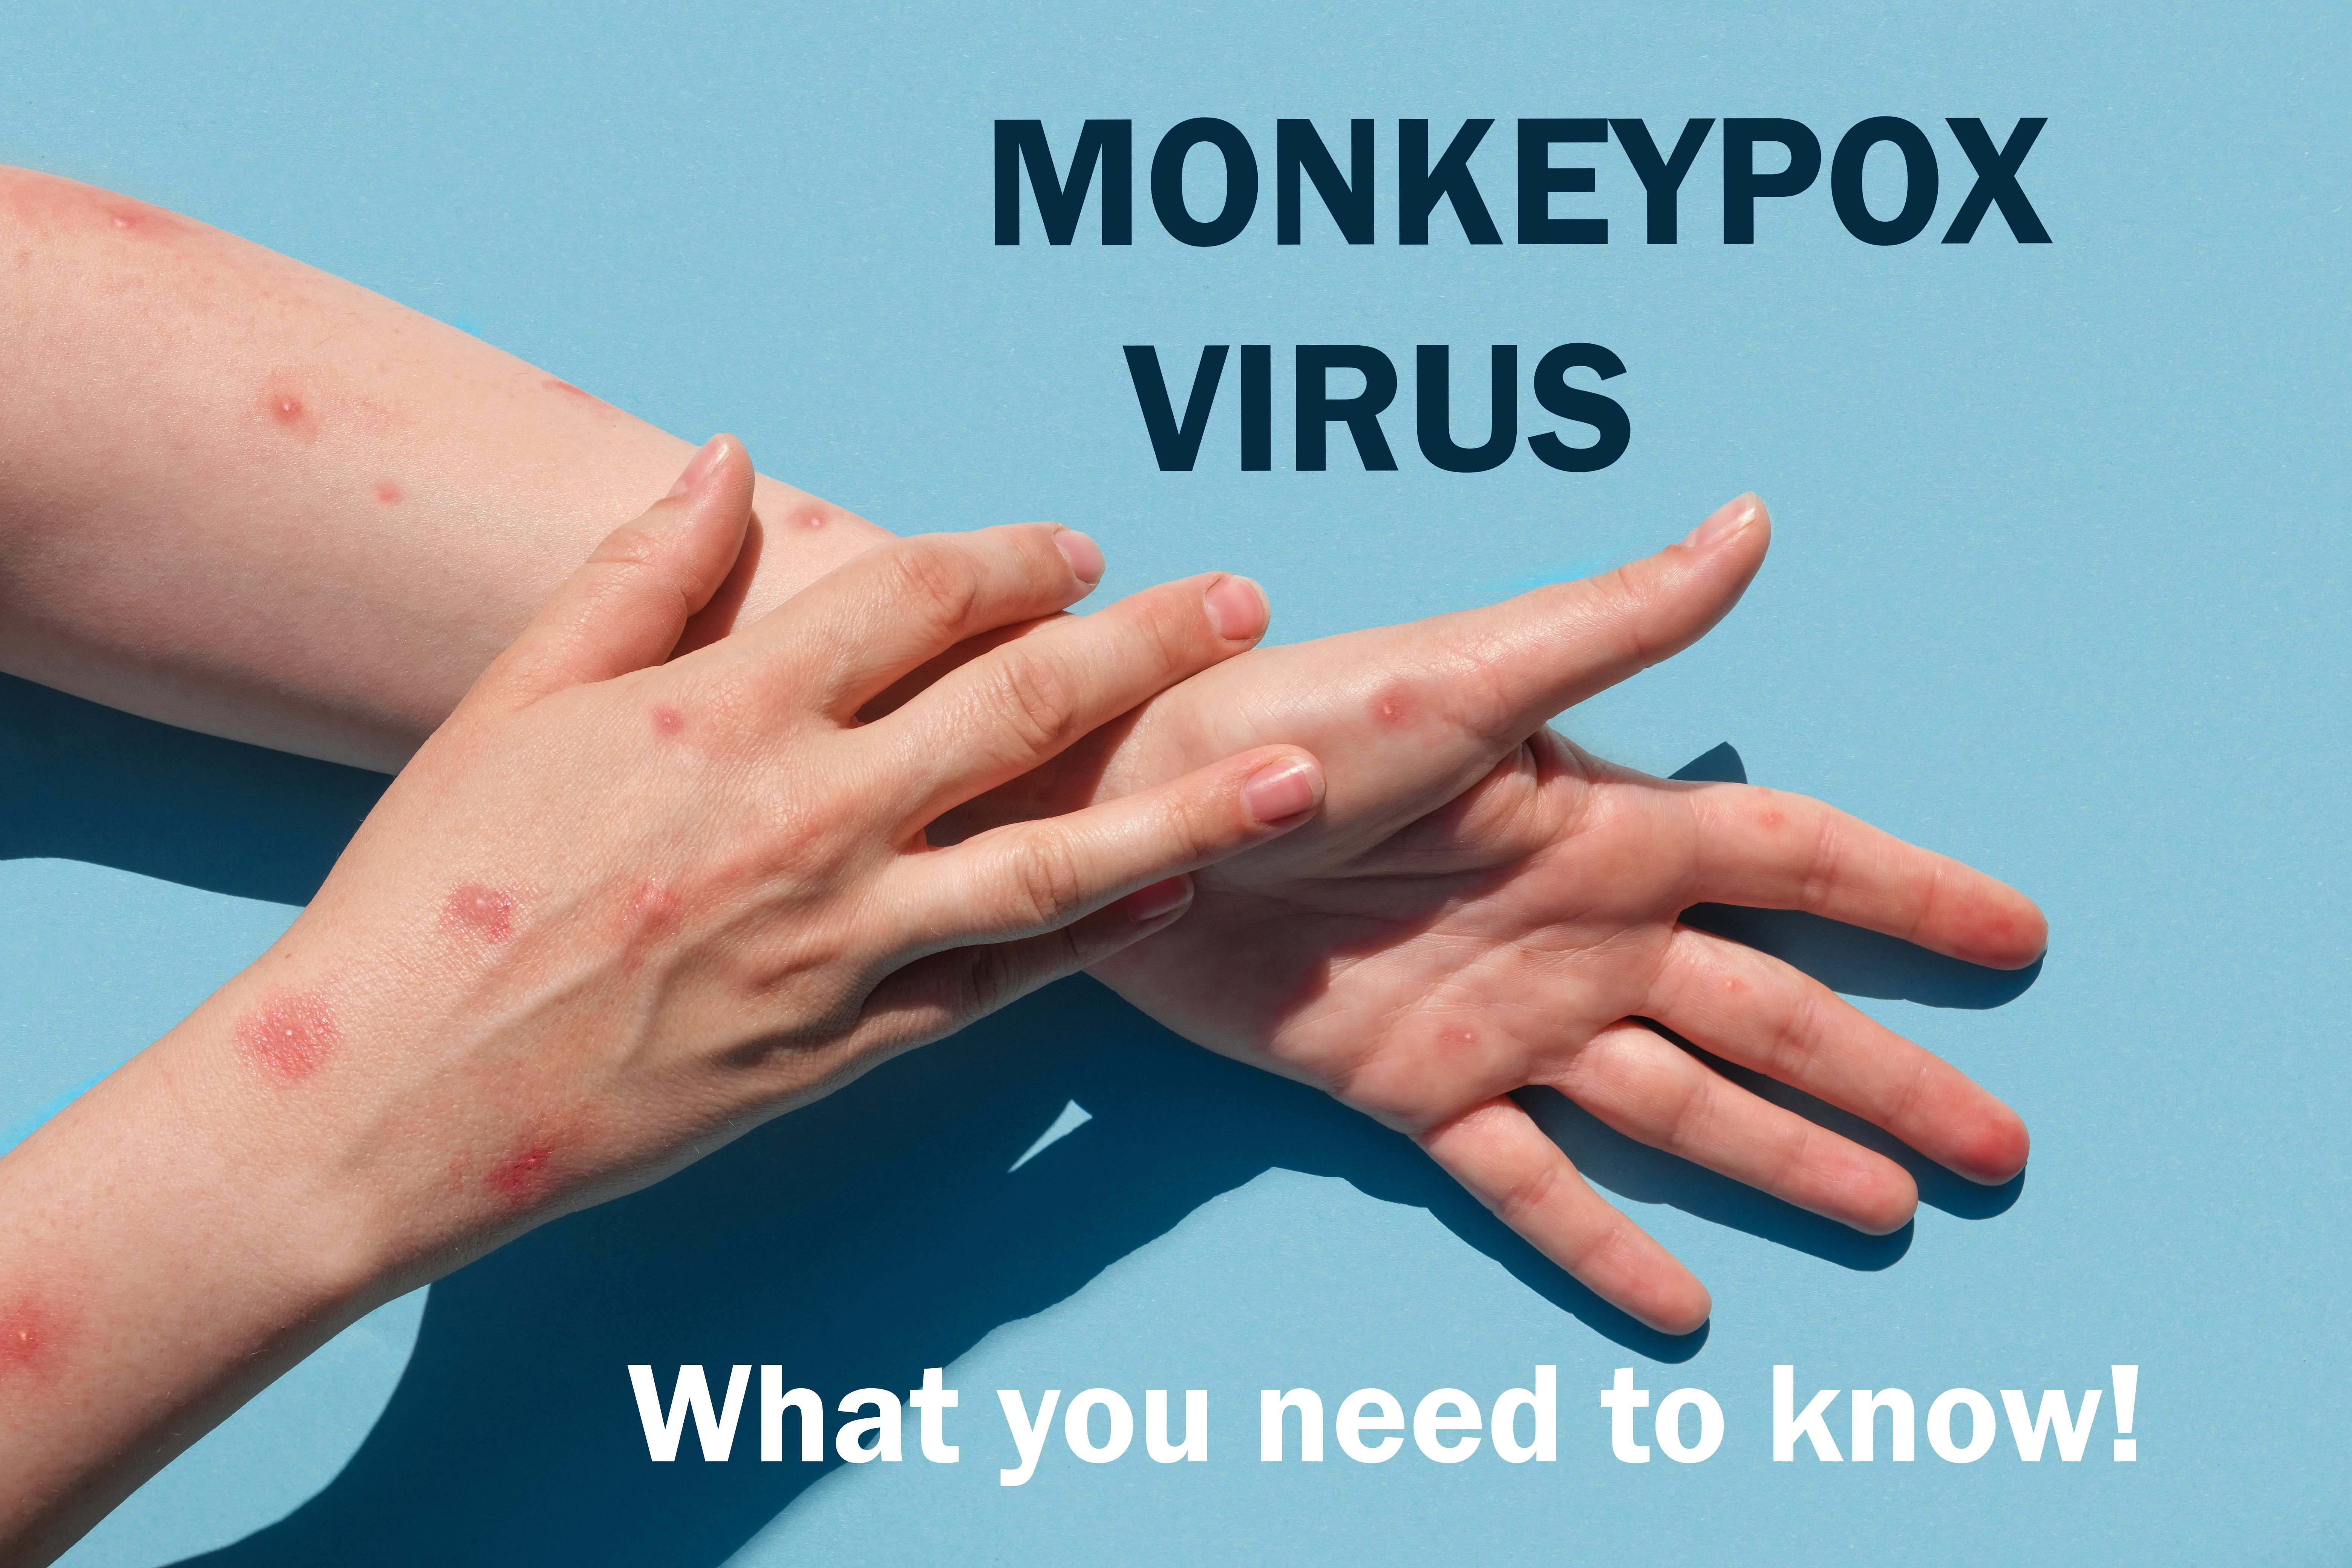 New precautions detail what clinicians treating suspected or confirmed monkeypox cases need to know.